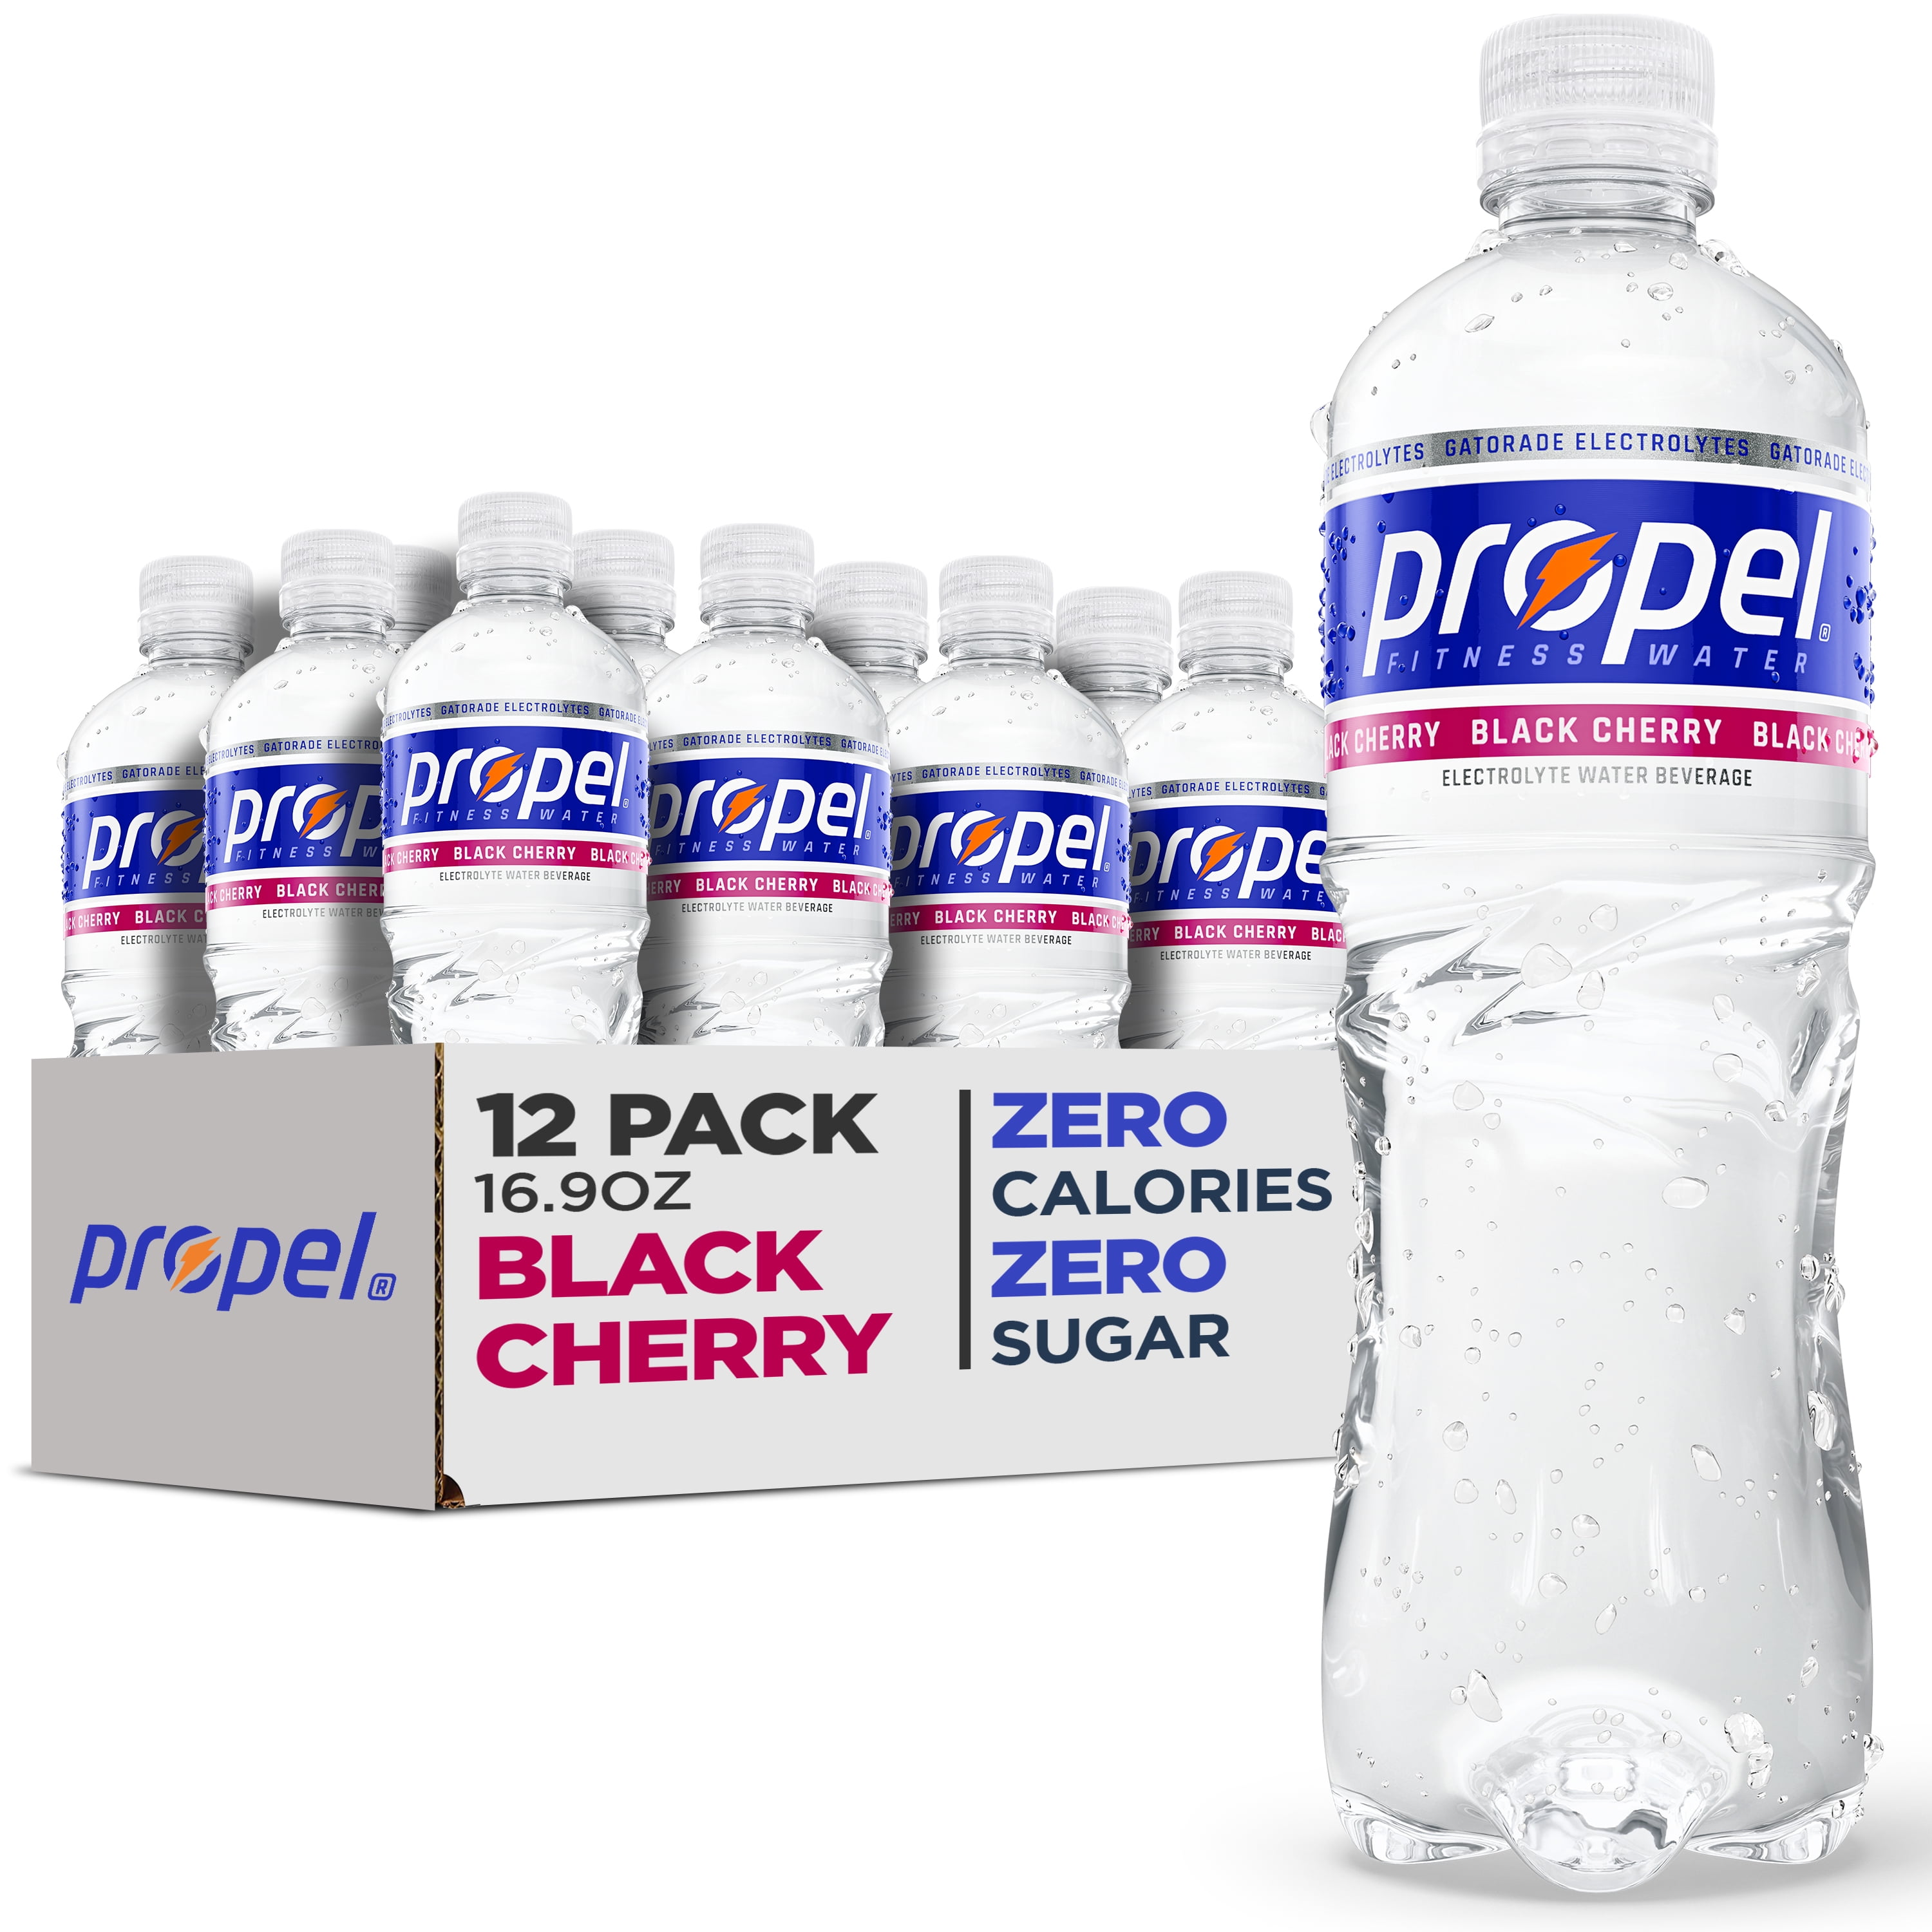 Propel Cherry Flavored Enhanced Water with Electrolytes, 16.9 oz, 12 Pack Bottles